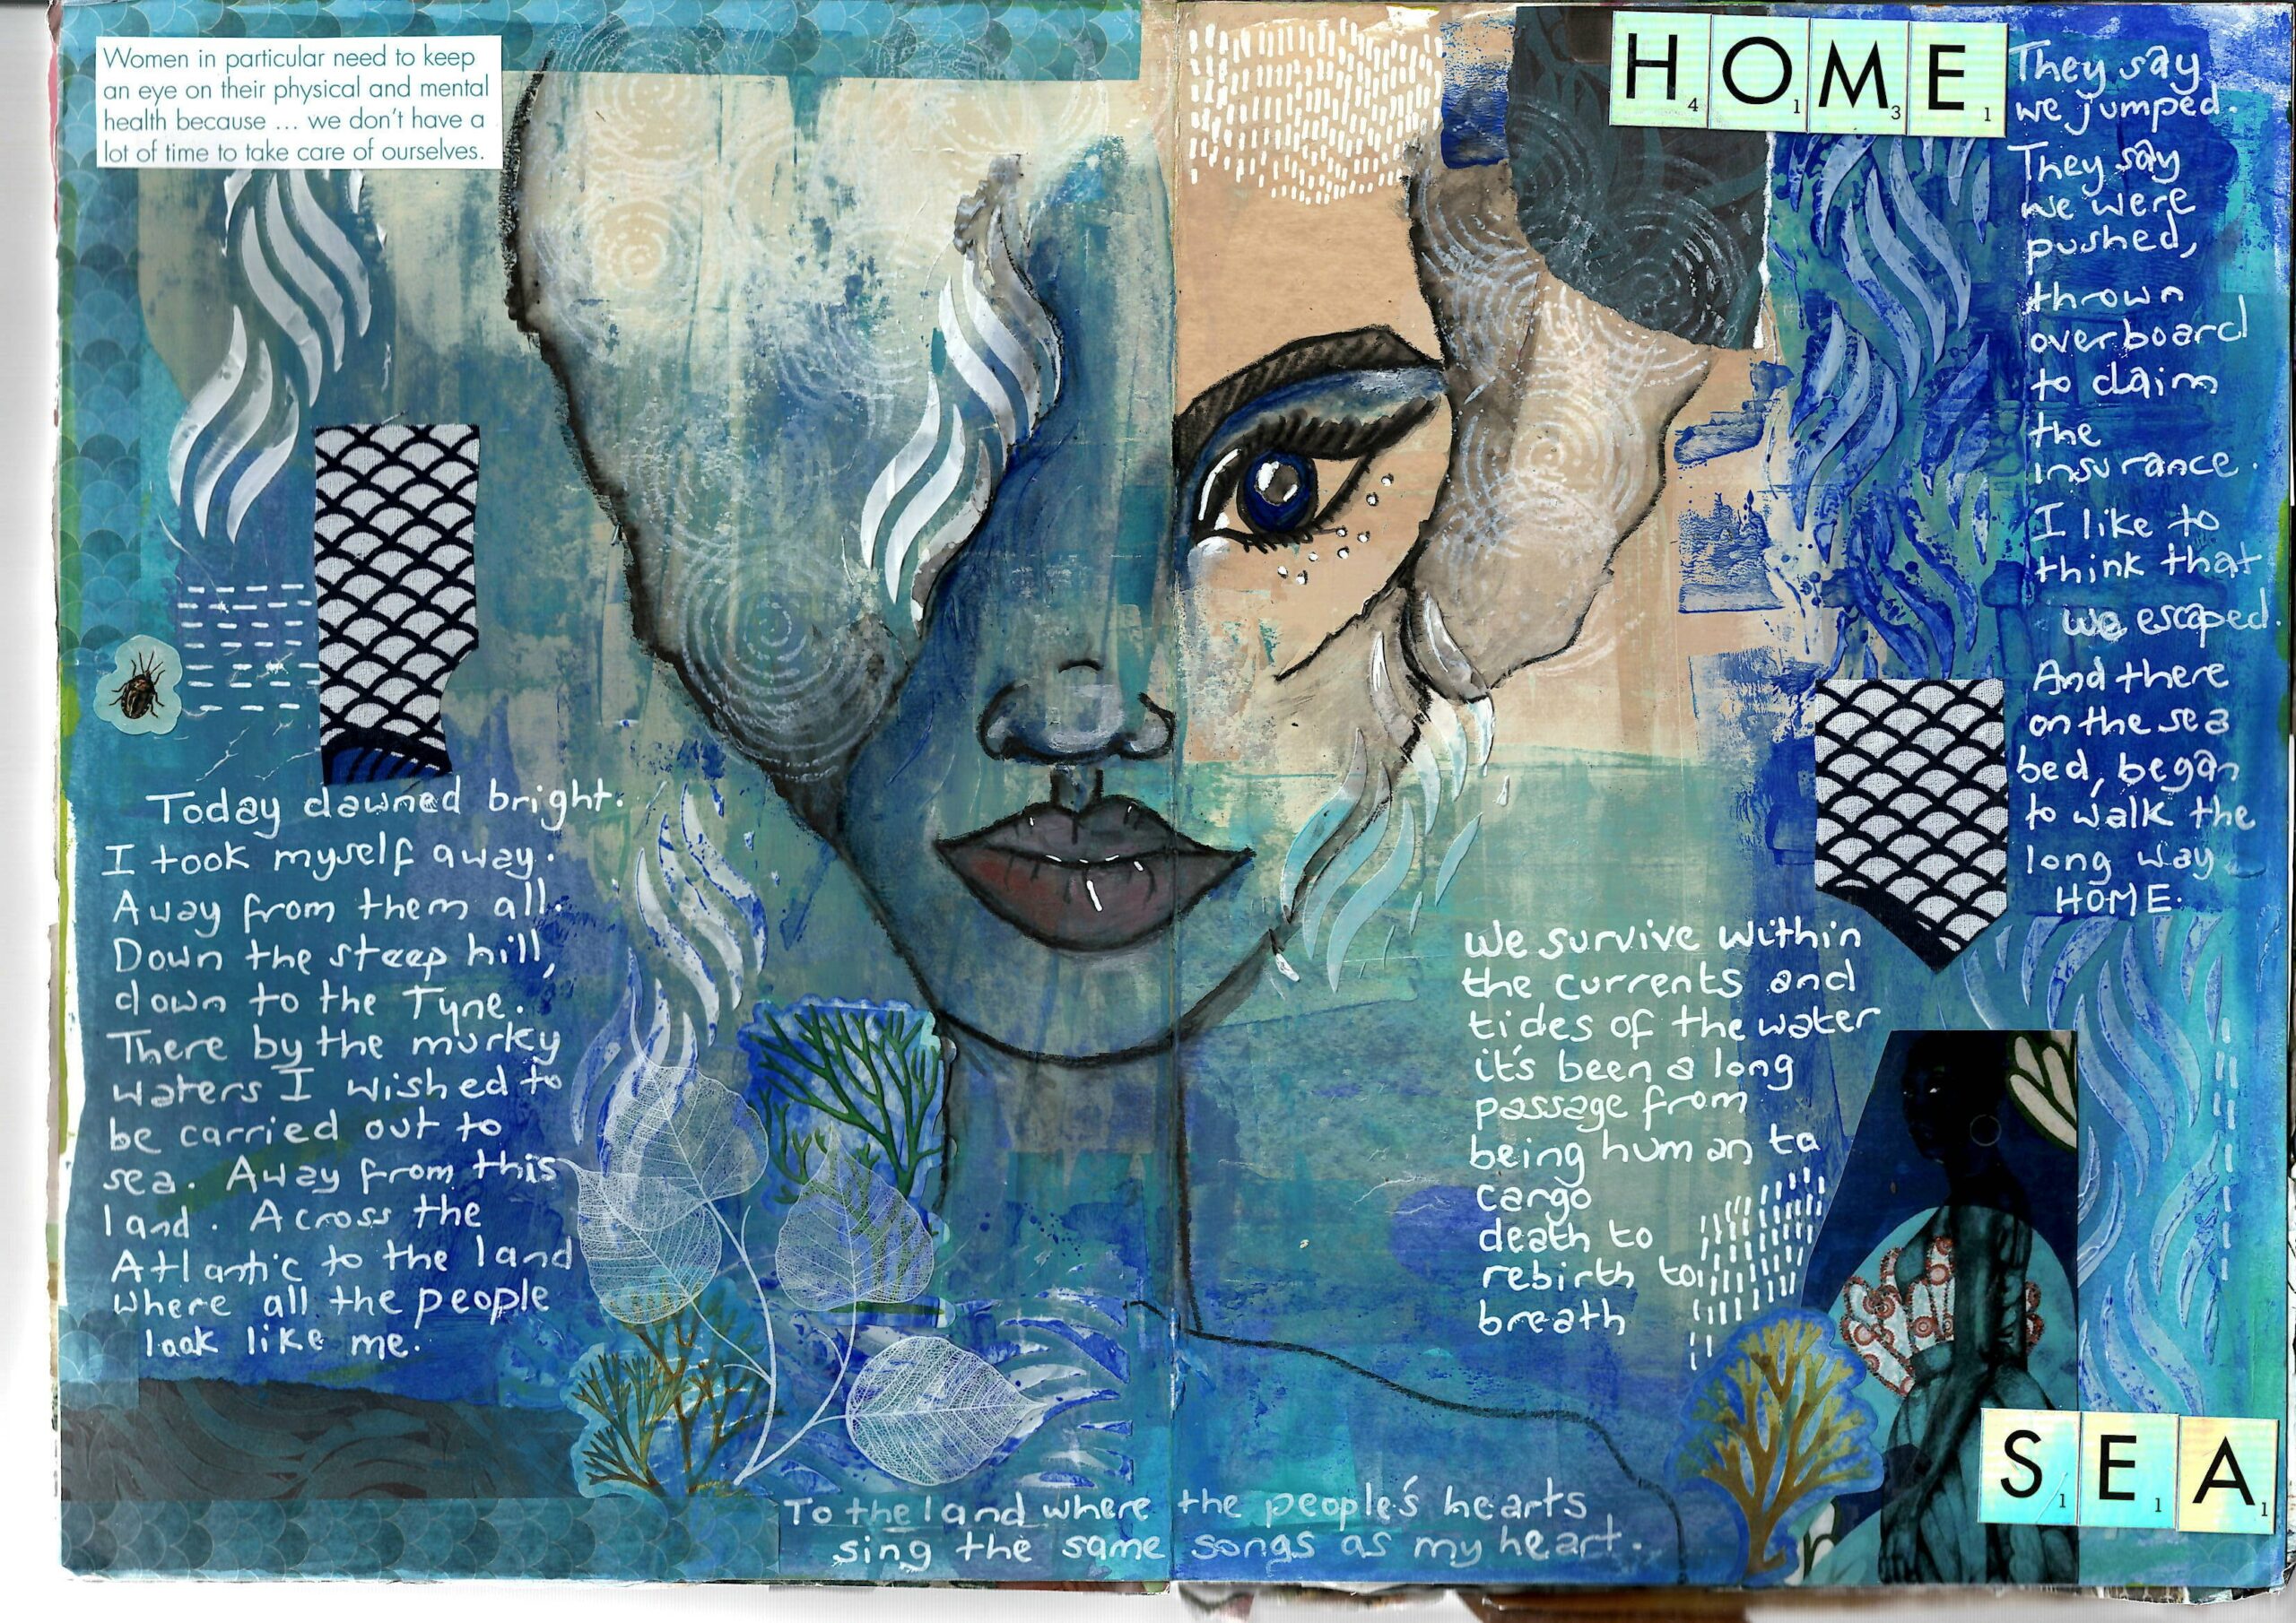 Artwork by Sheree Mack, a variety of mediums with prose